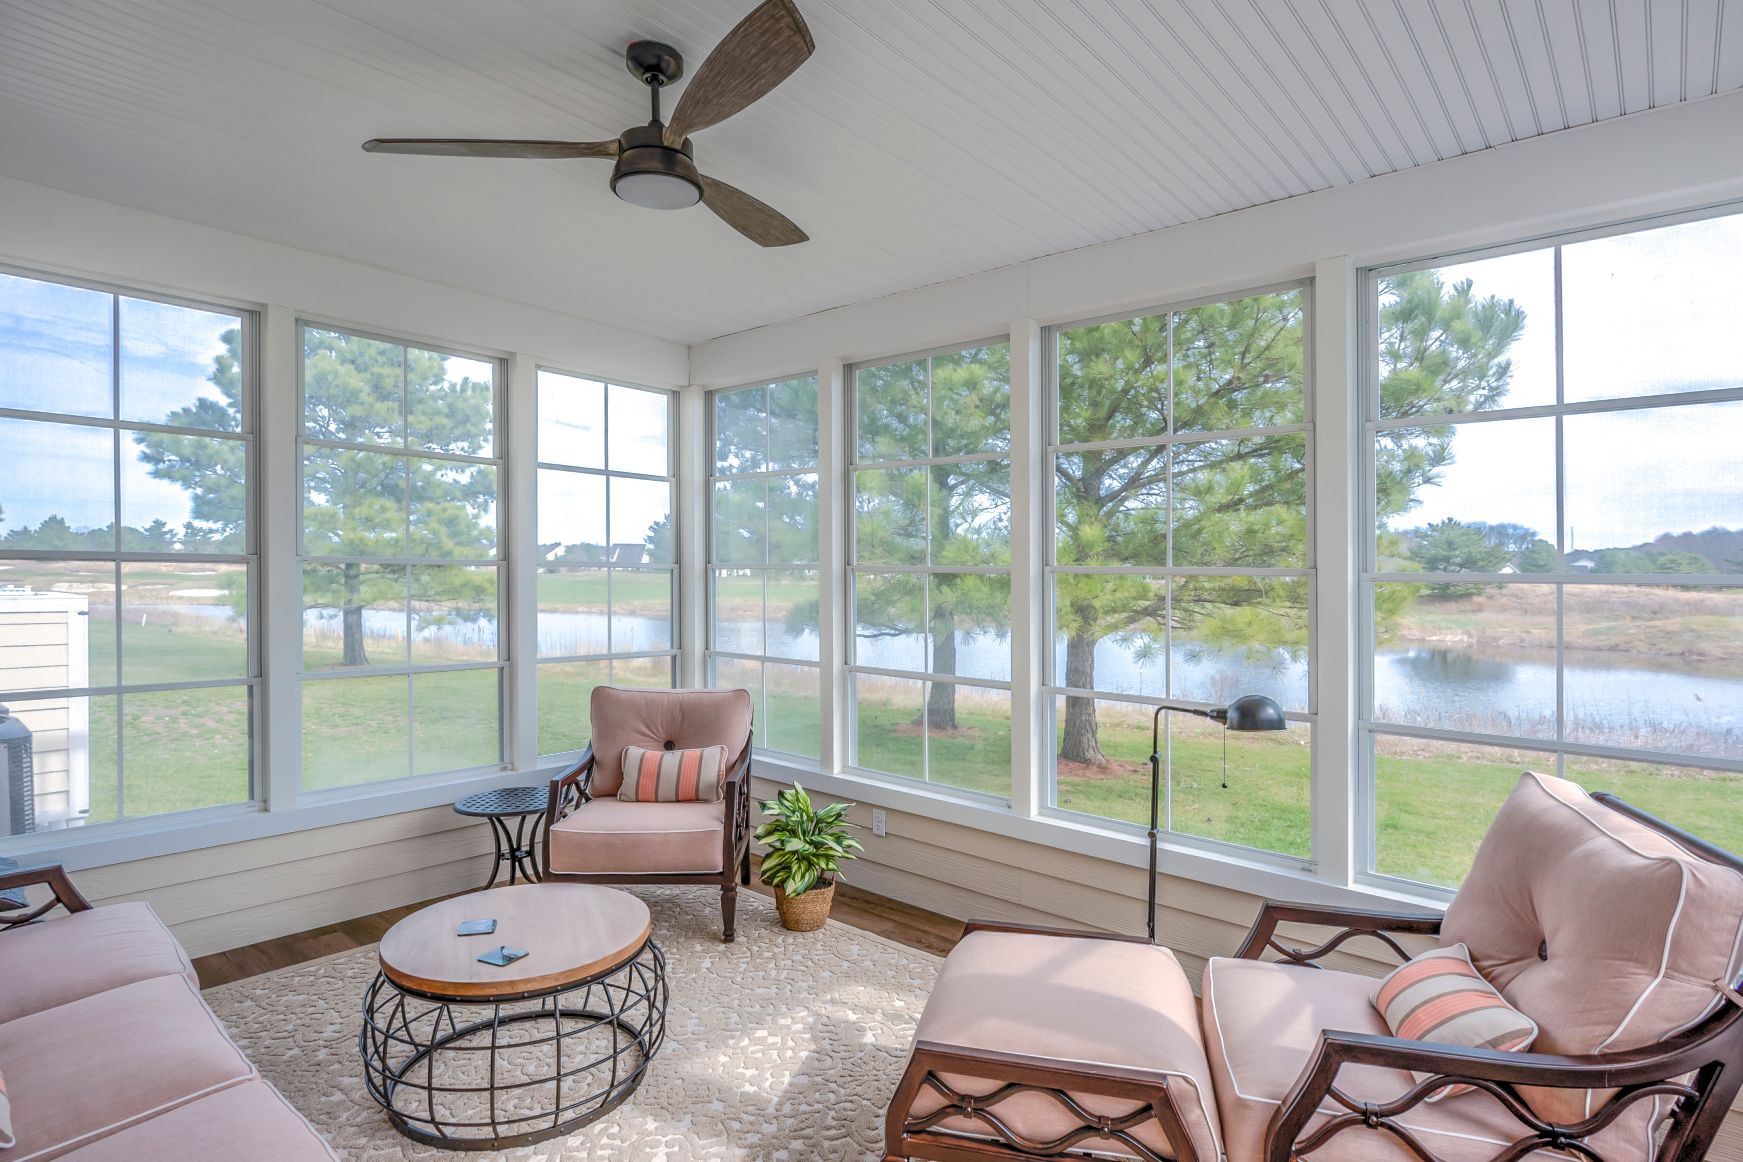 October Glory Exterior in Ocean View DE - Sunroom with Beige Soft Furniture and Vertical Sliding Windows